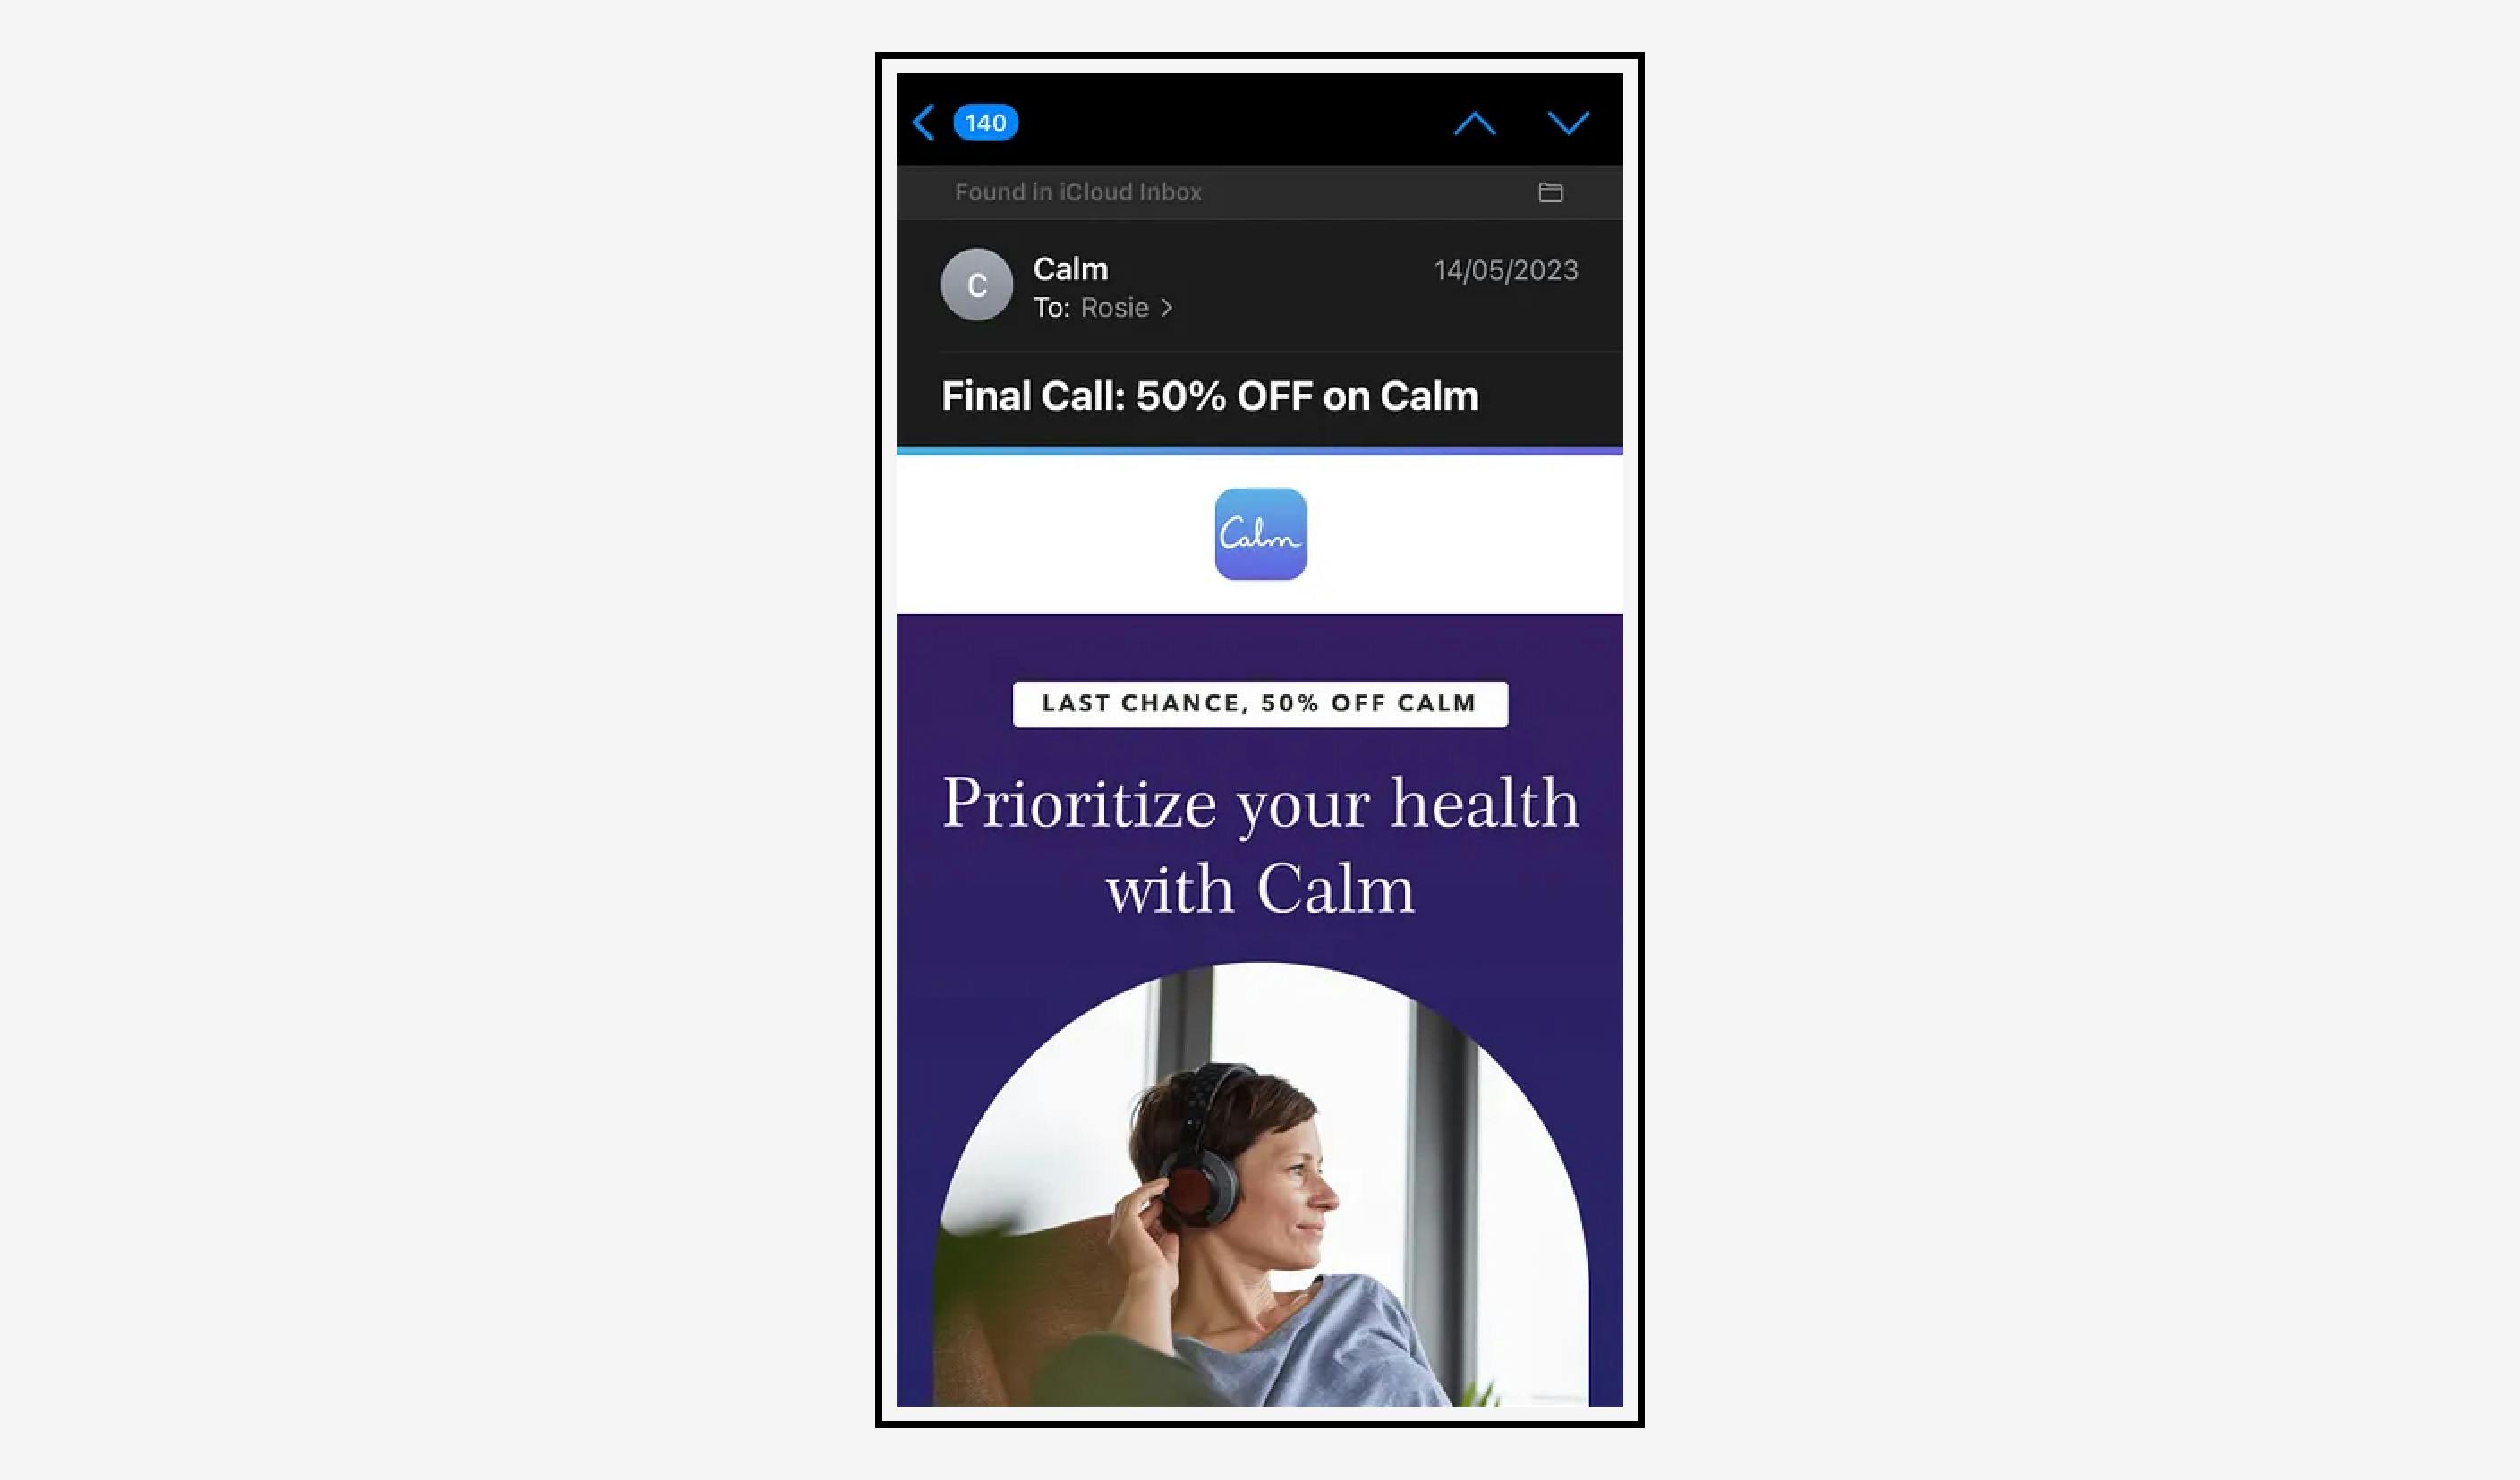 calm app email with a discount promotion